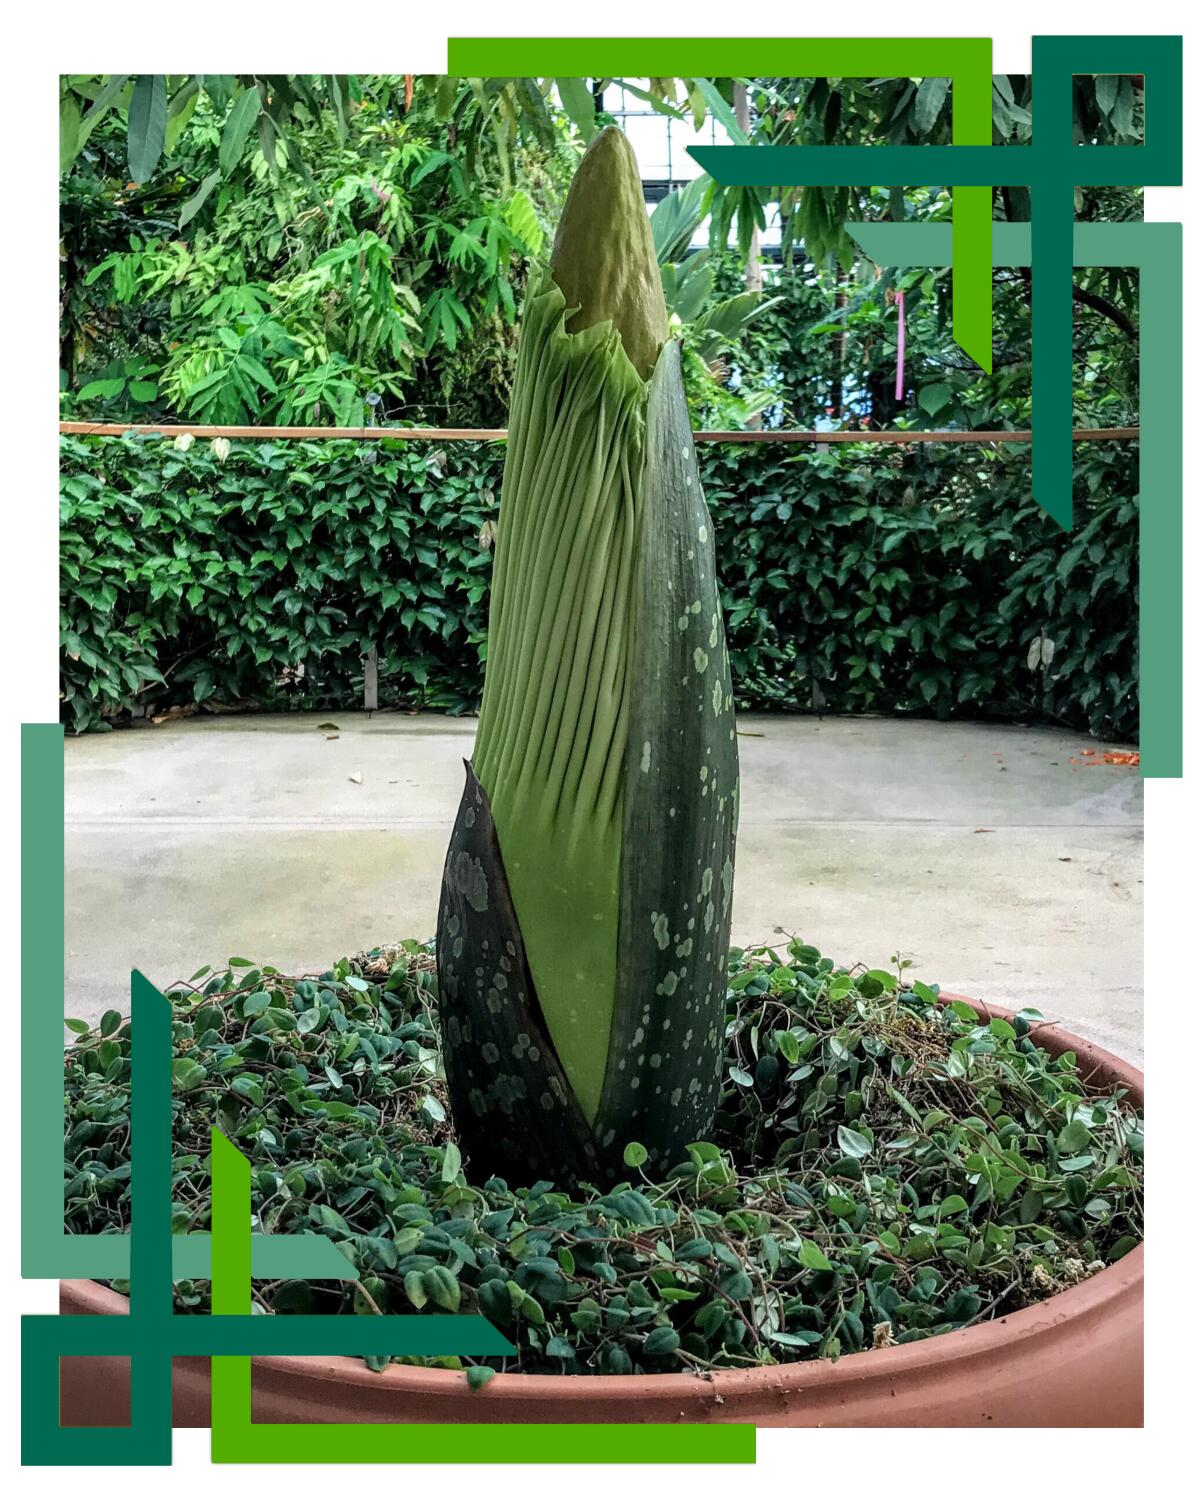 Amorphophallus titanum or corpse plant, about to bloom